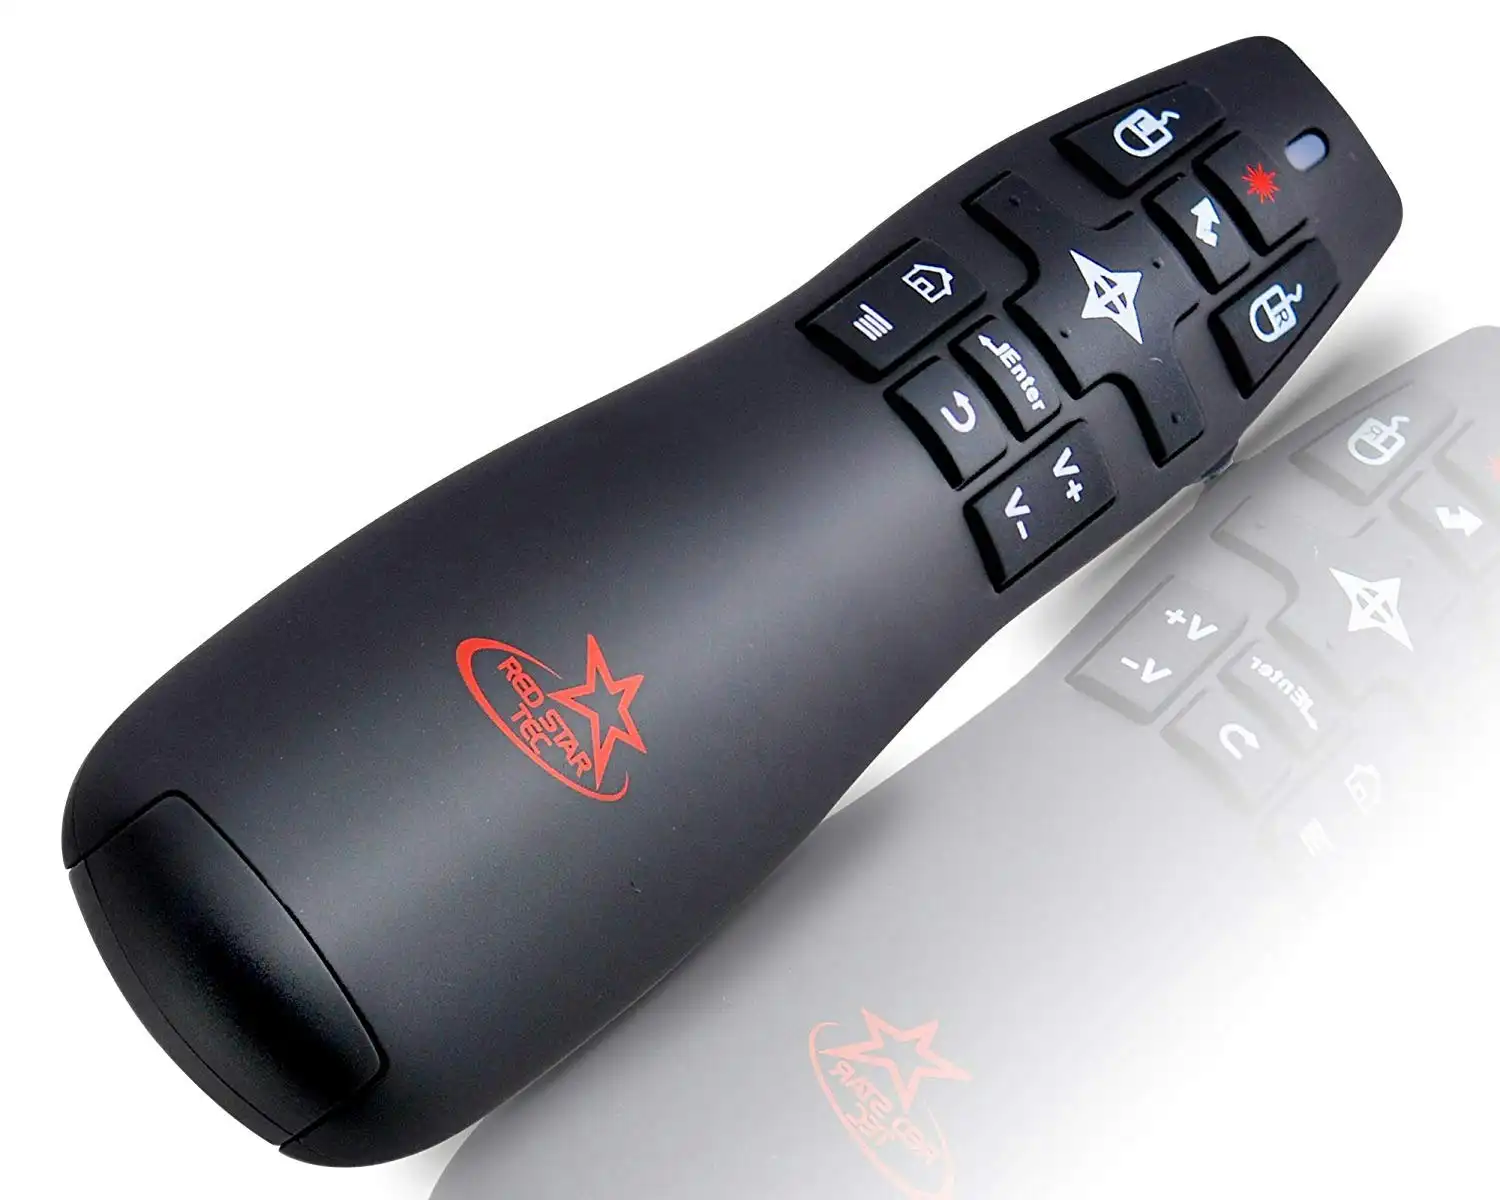 Red Star Tec Wireless Powerpoint Presentation Remote Clicker and Keynote Presenter with Wireless Mouse (PR-820)